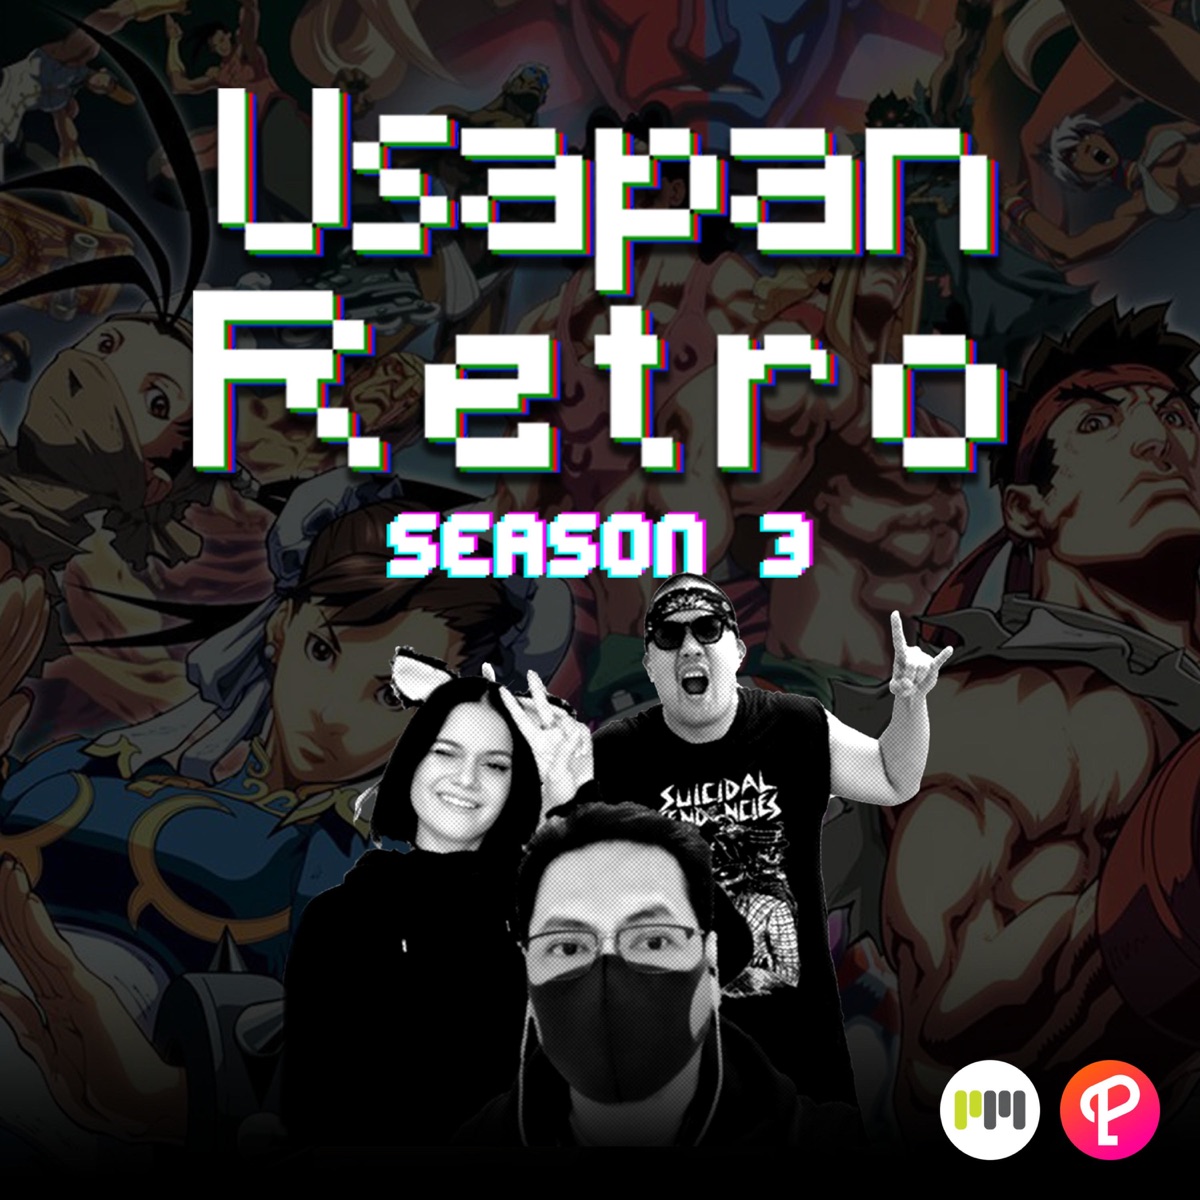 Top 25 PS1 Games! Arcade Attack Retro Gaming Podcast